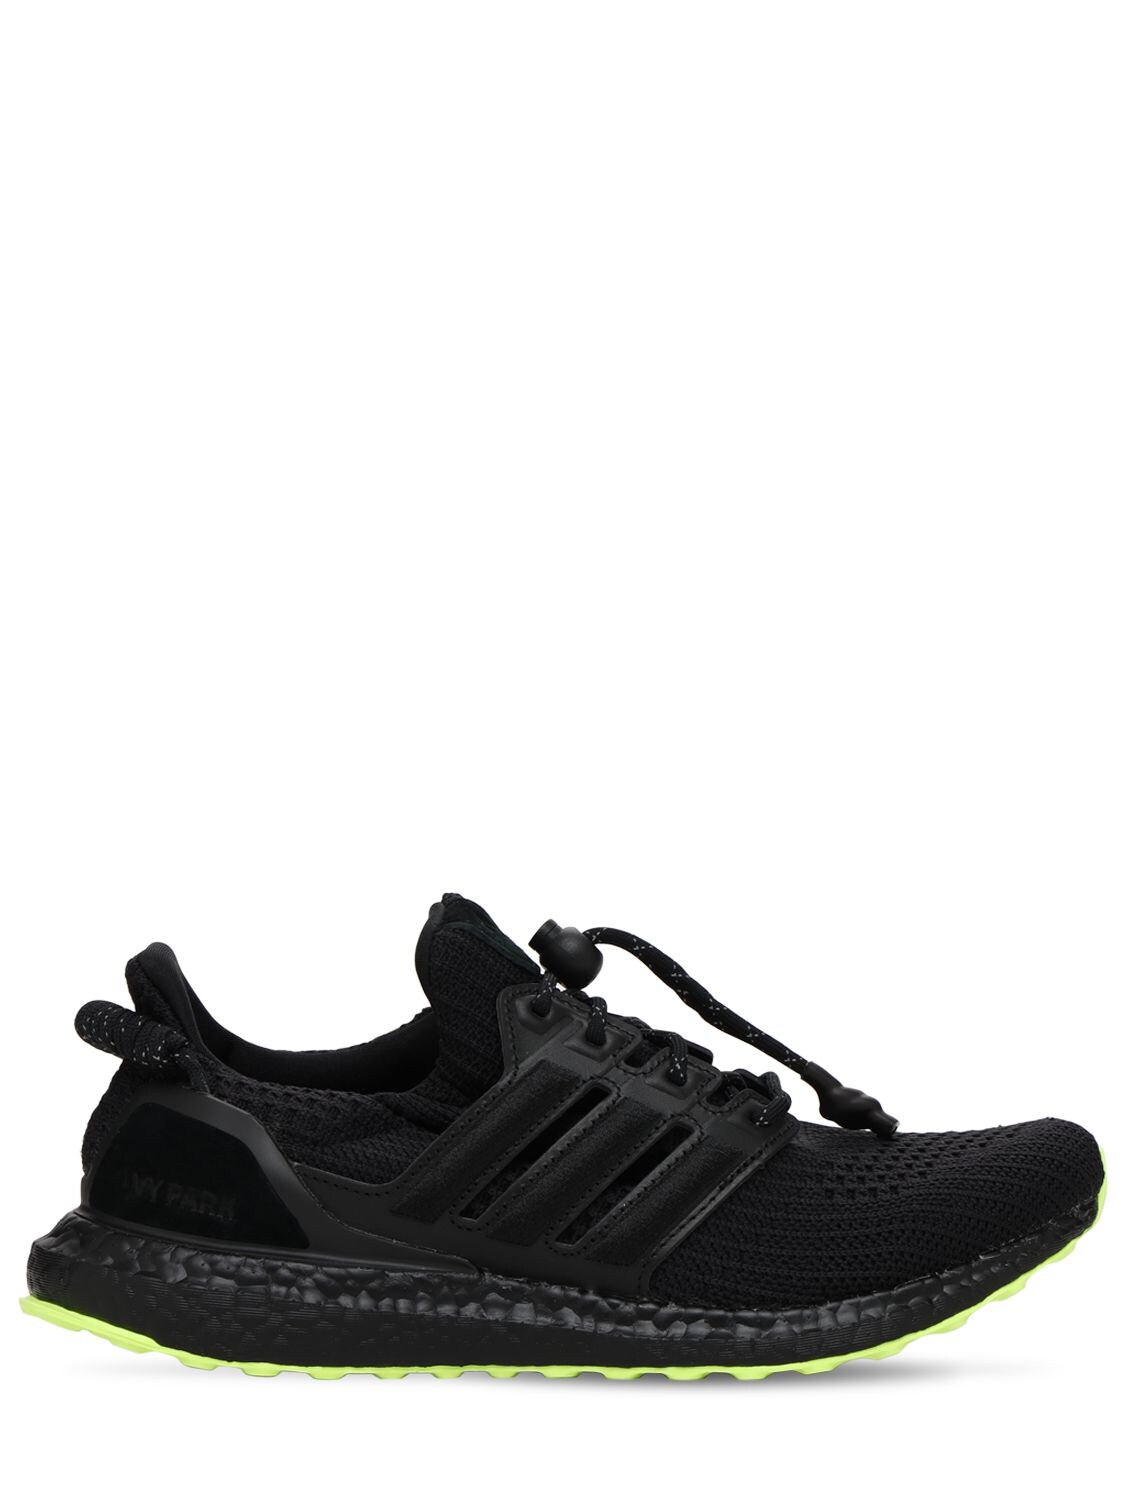 Adidas X Ivy Park Ivy Park Ultra Boost Og Sneakers In Black